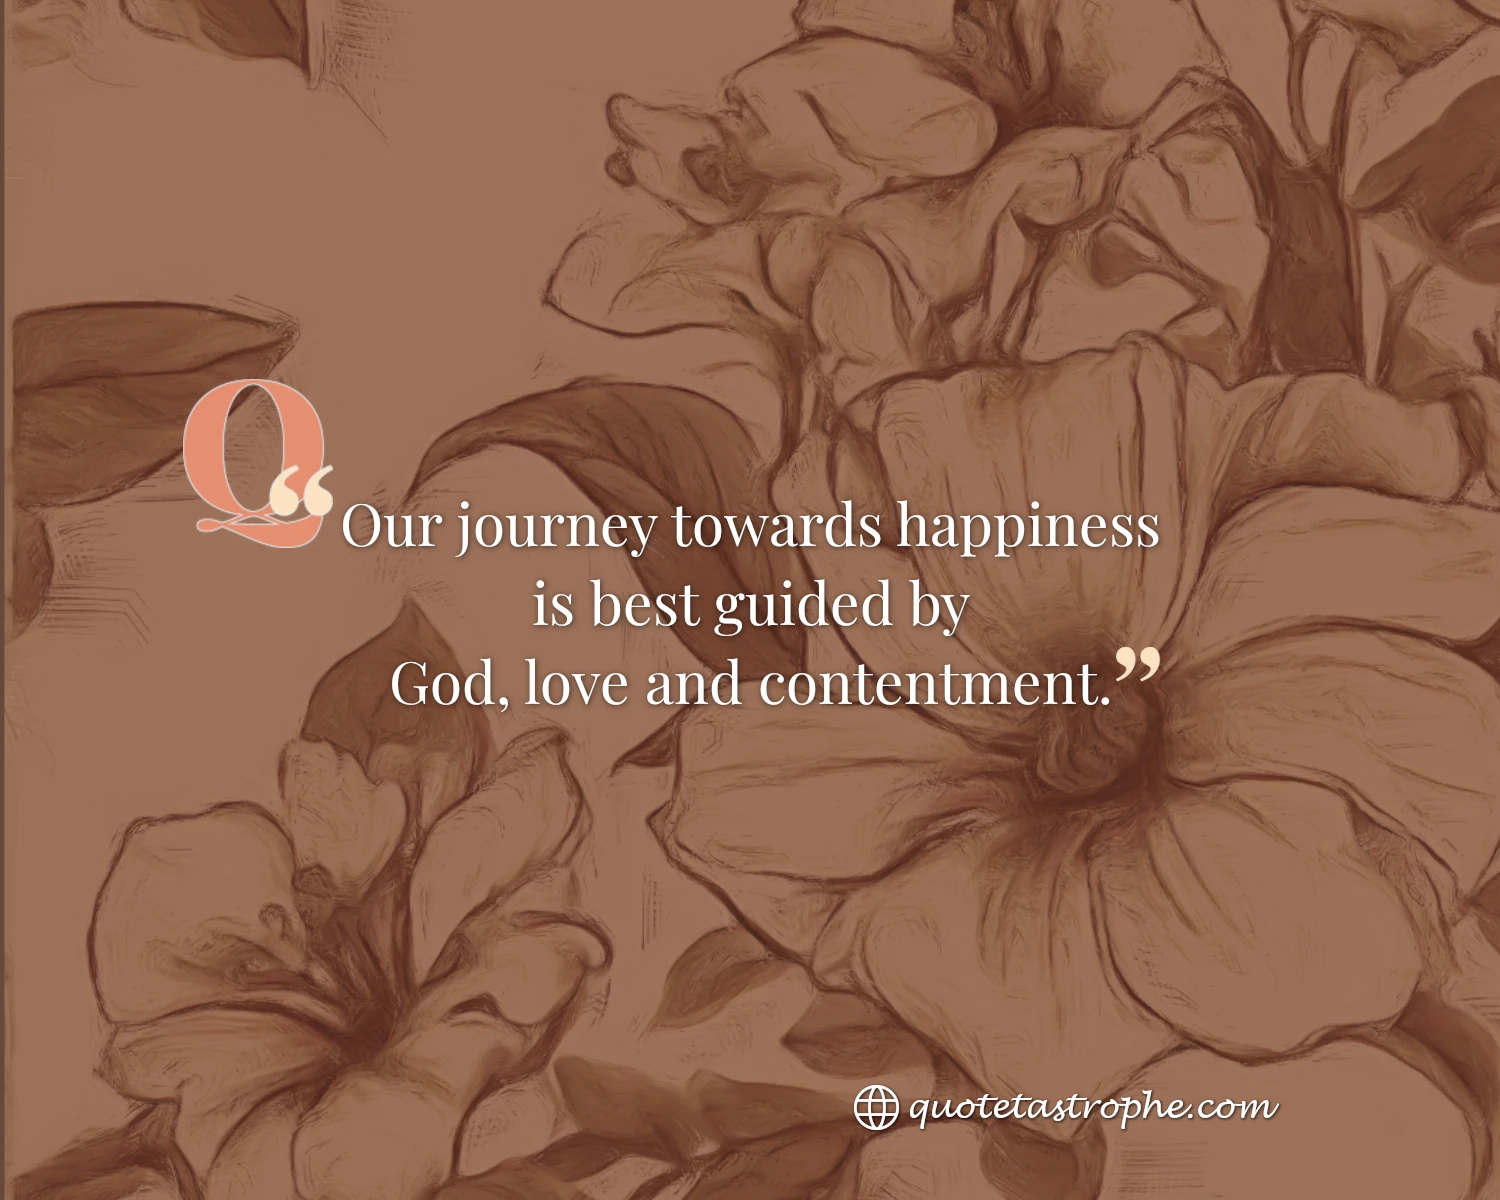 Our Journey Towards Happiness is Best Guided by God